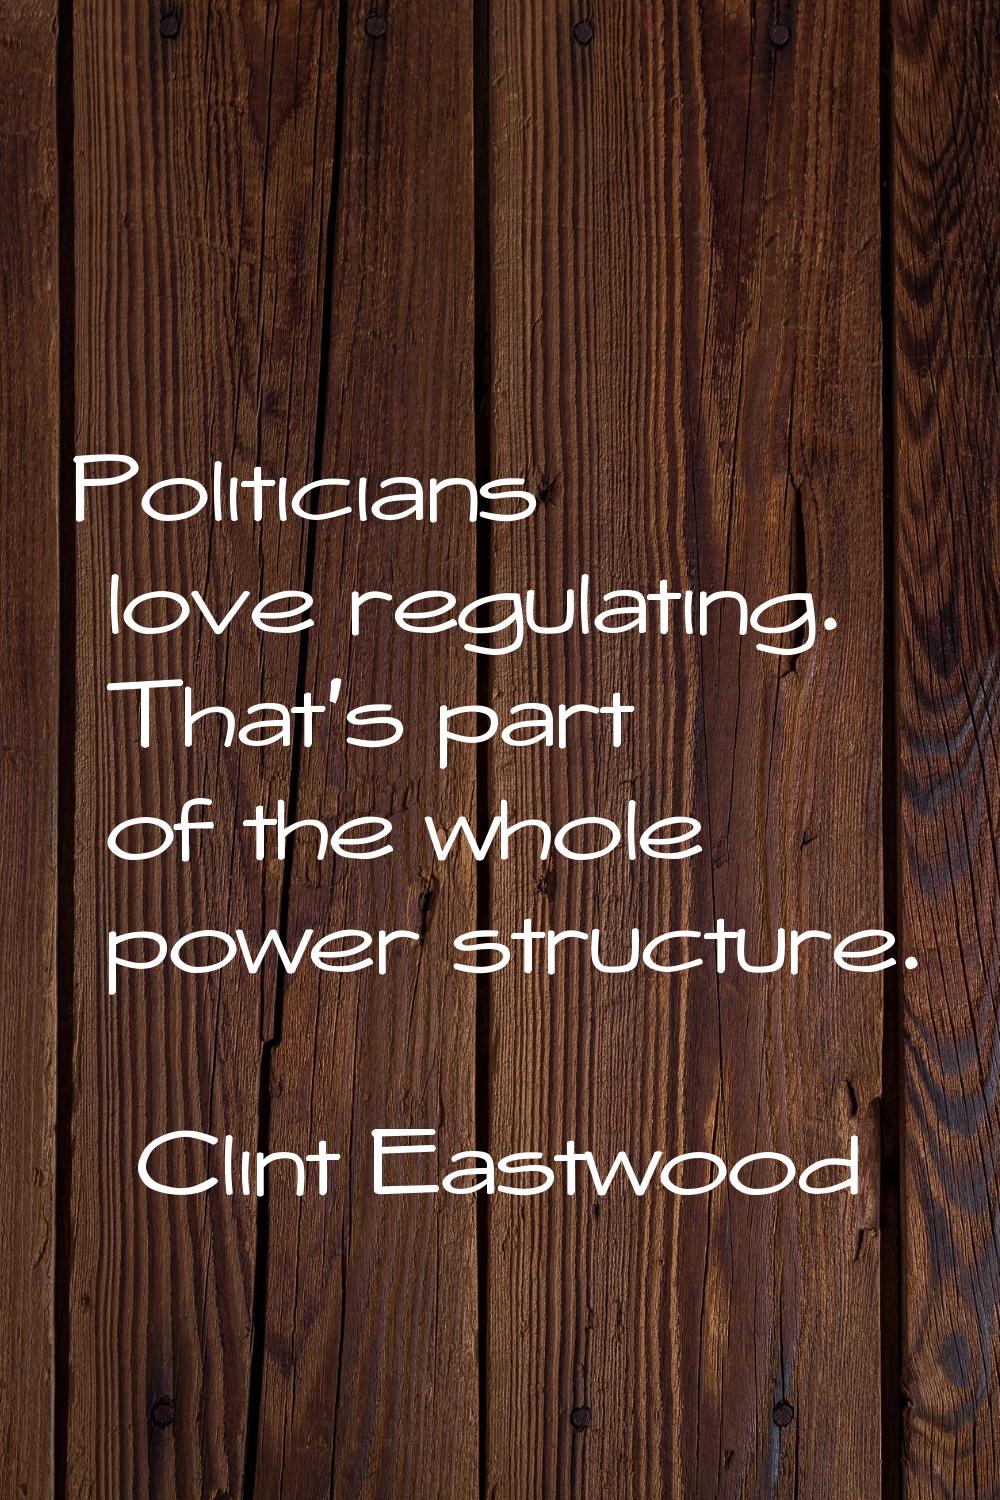 Politicians love regulating. That's part of the whole power structure.